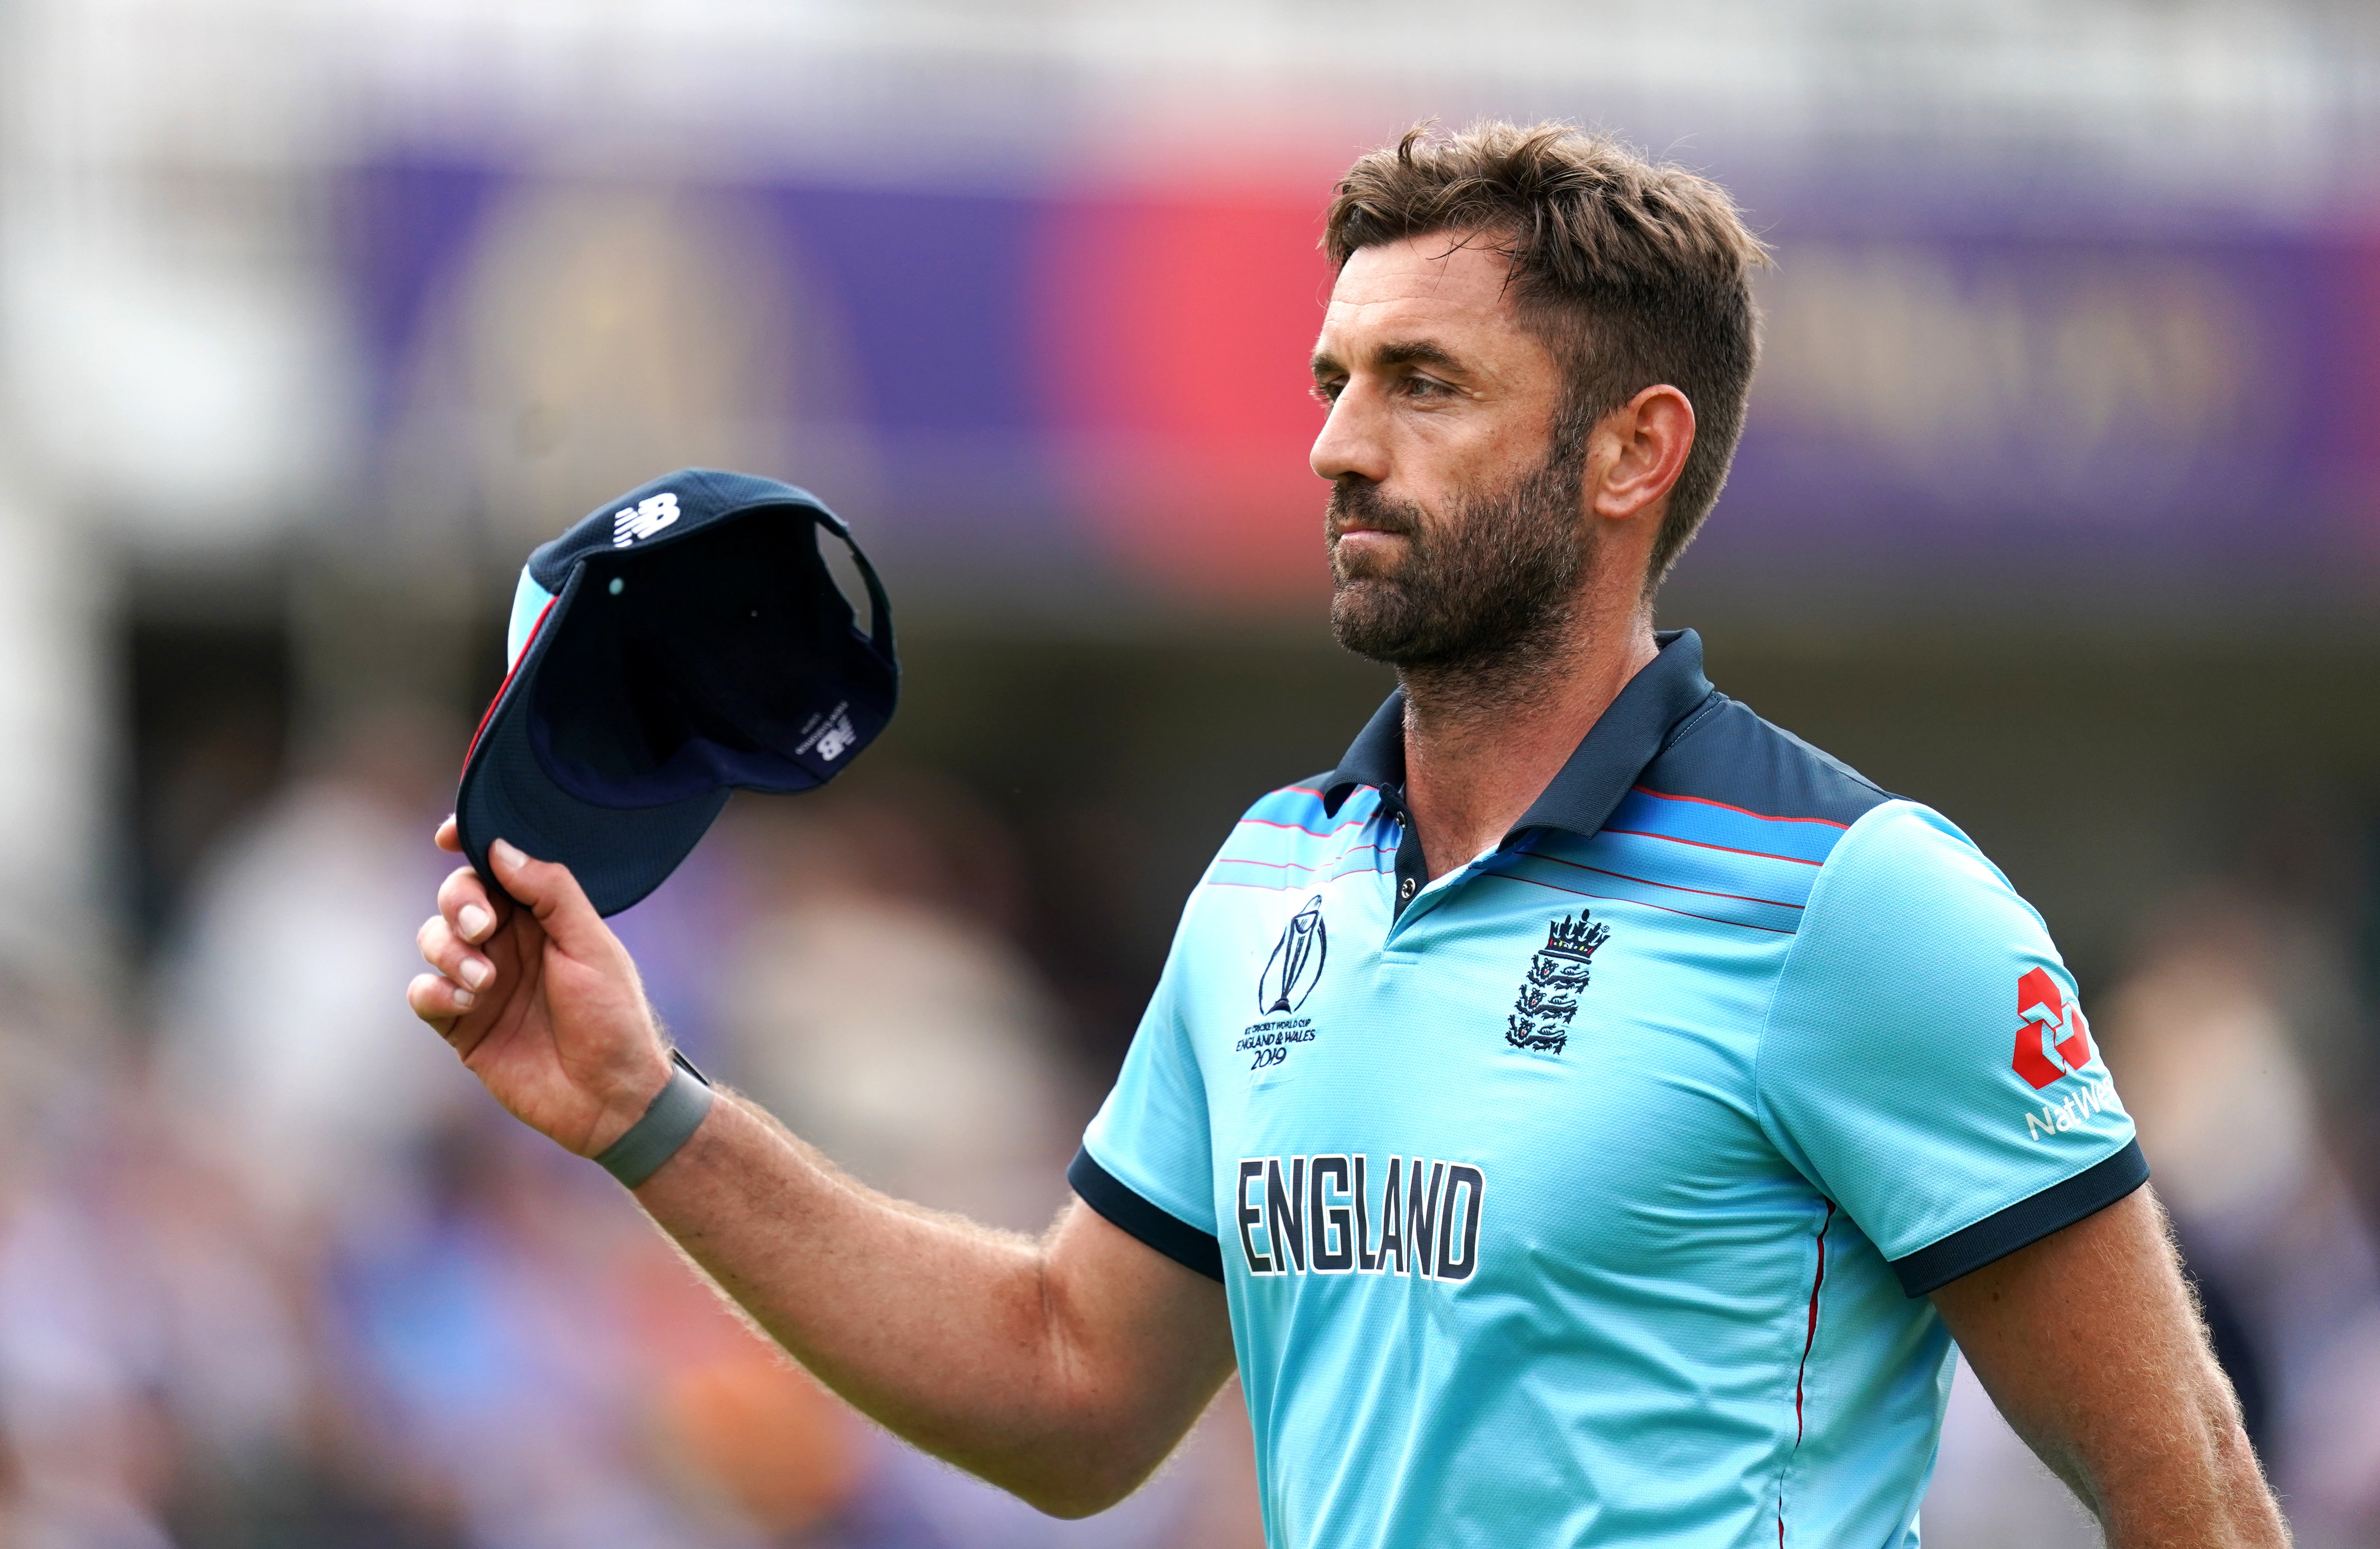 Surrey and England’s Liam Plunkett has hit out at online trolls (John Walton/PA)